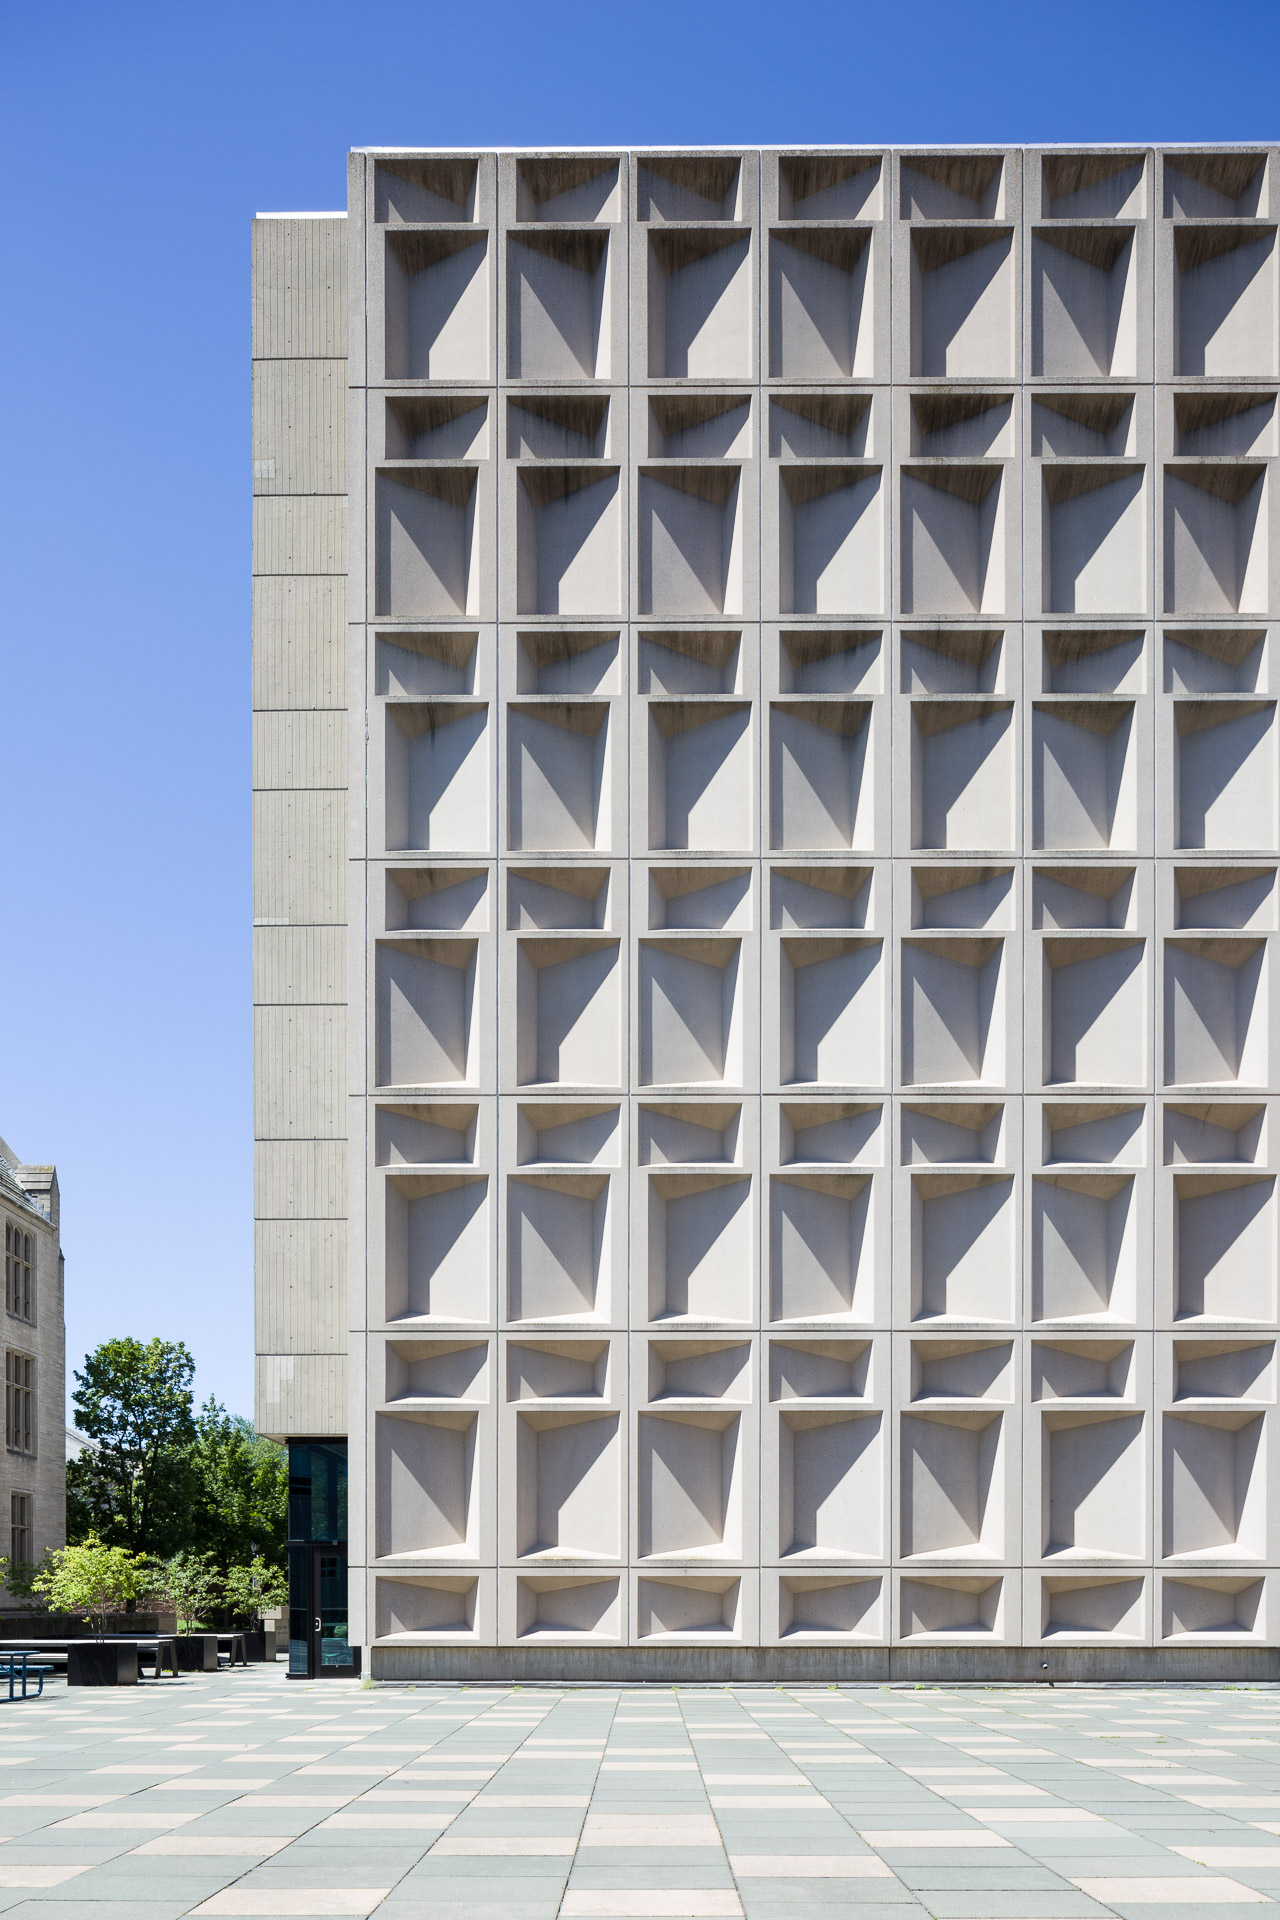 Becton Engineering and Applied Science Center at Yale University in New Haven, CT by Marcel Breuer. Photo by Jason R. Woods.